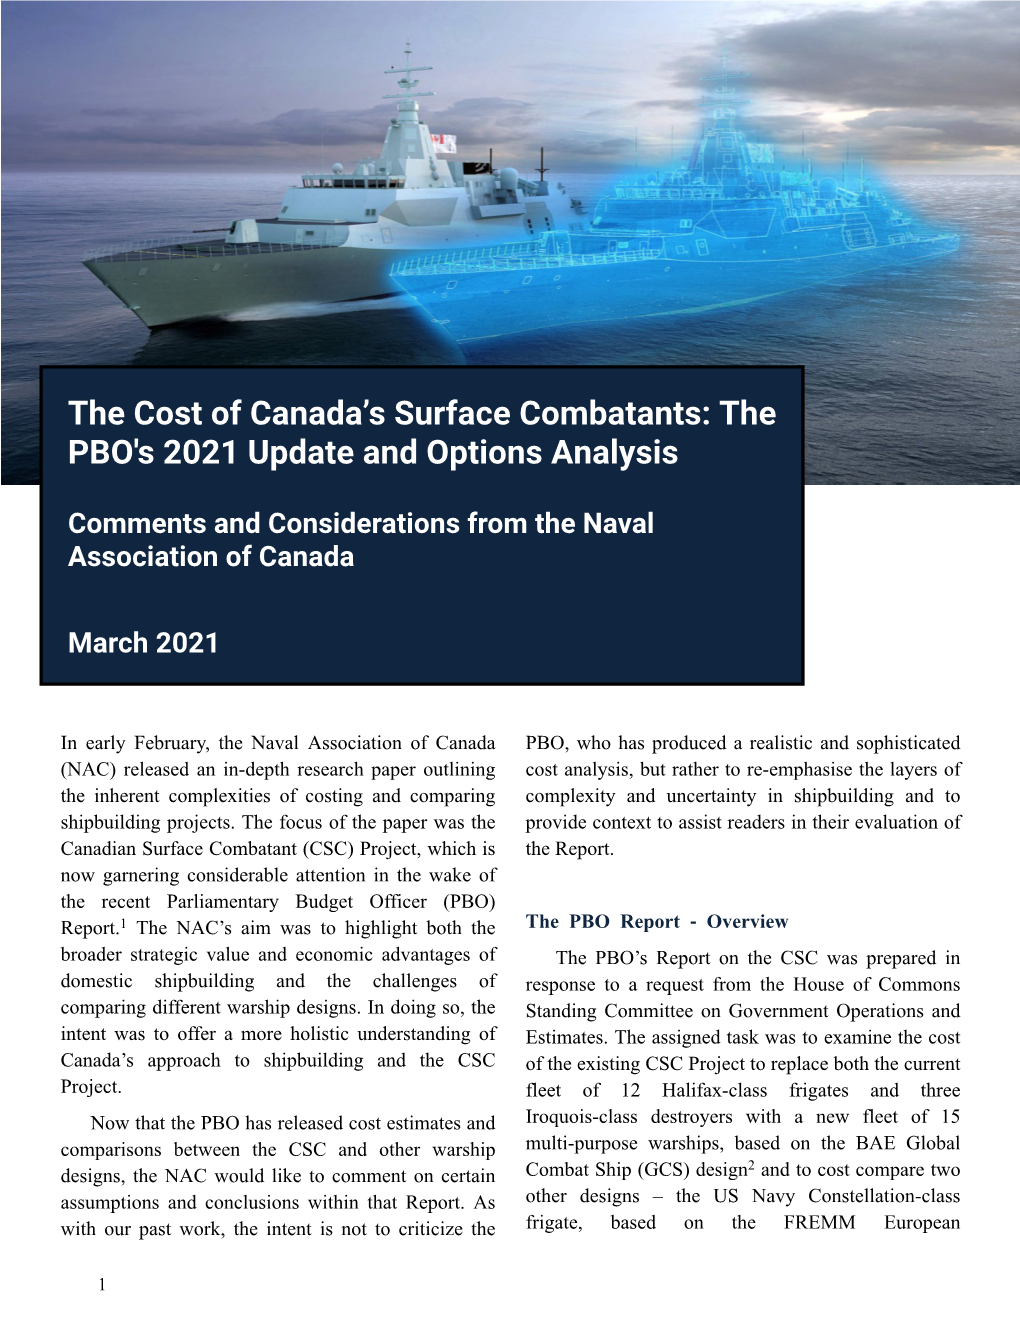 Read the NAC's Response to the PBO's February Report on the Canadian Surface Combatant Program